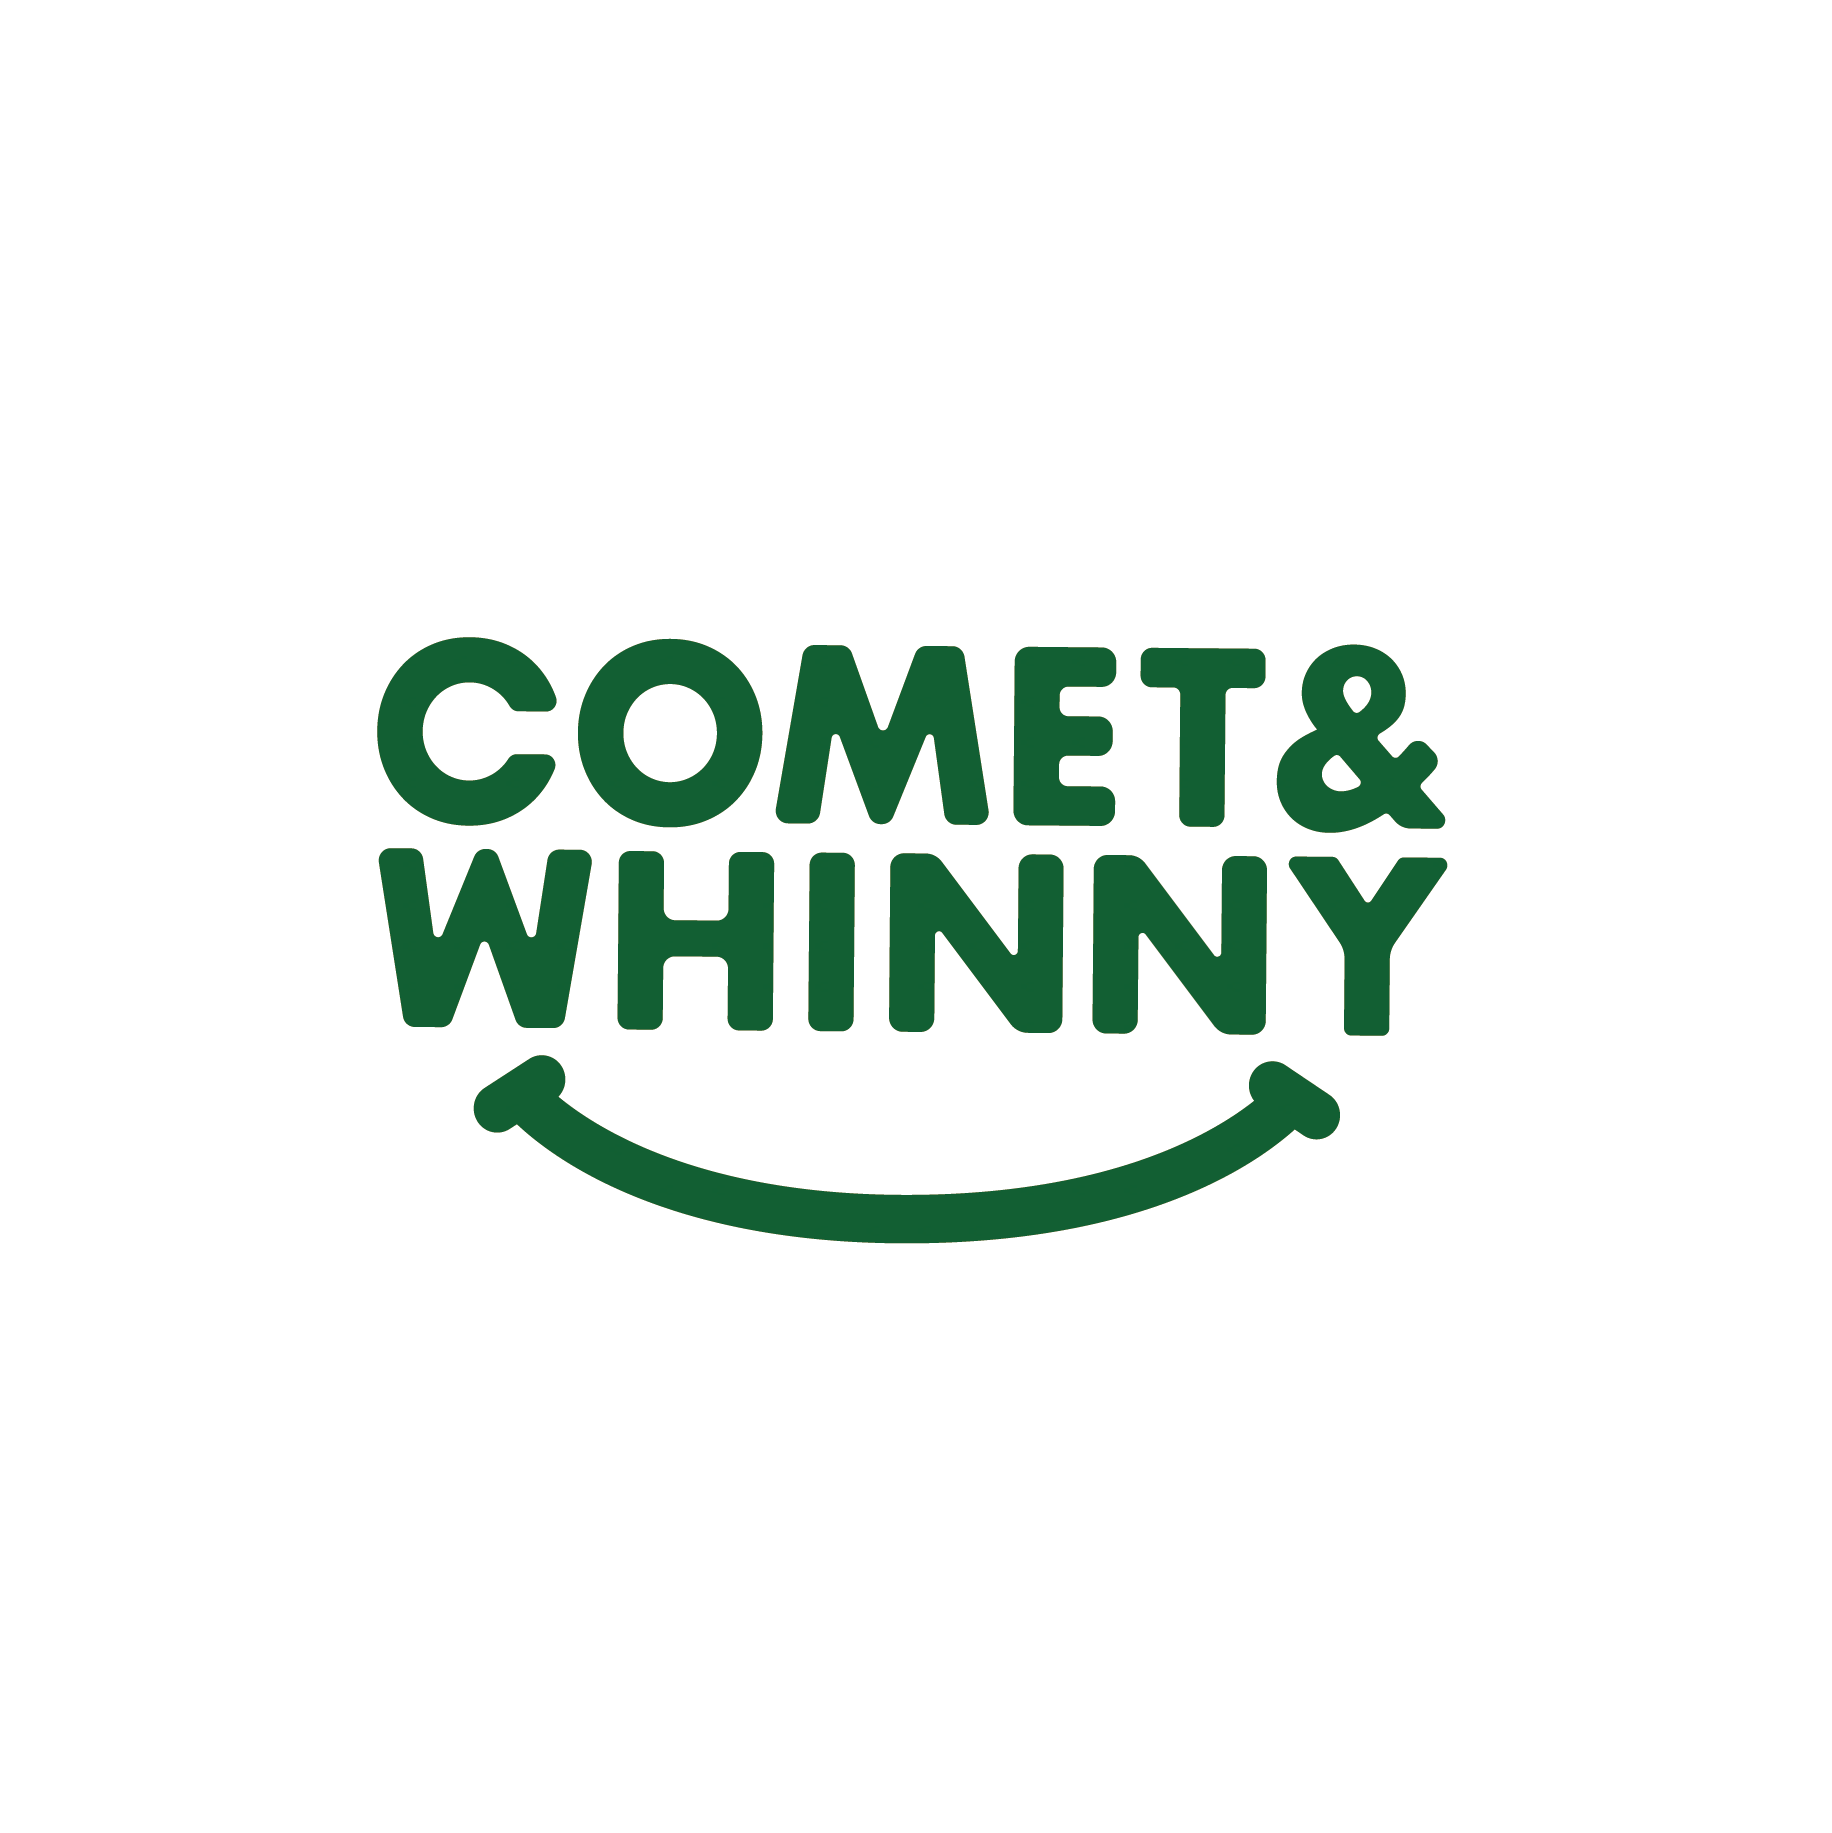 COMET & WHINNY